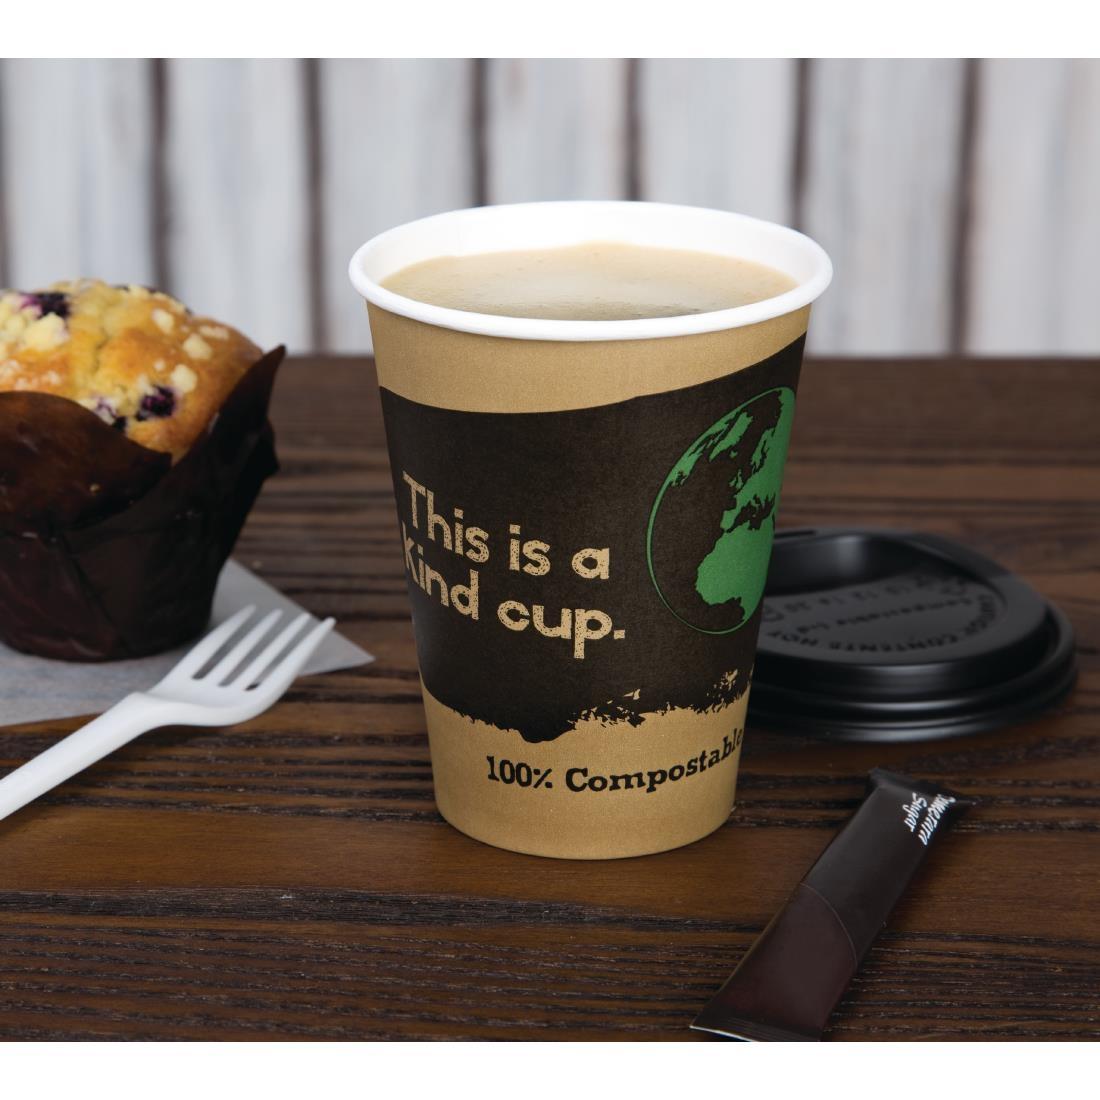 Fiesta Compostable Coffee Cups Single Wall 340ml / 12oz (Pack of 1000) - DS058  - 4